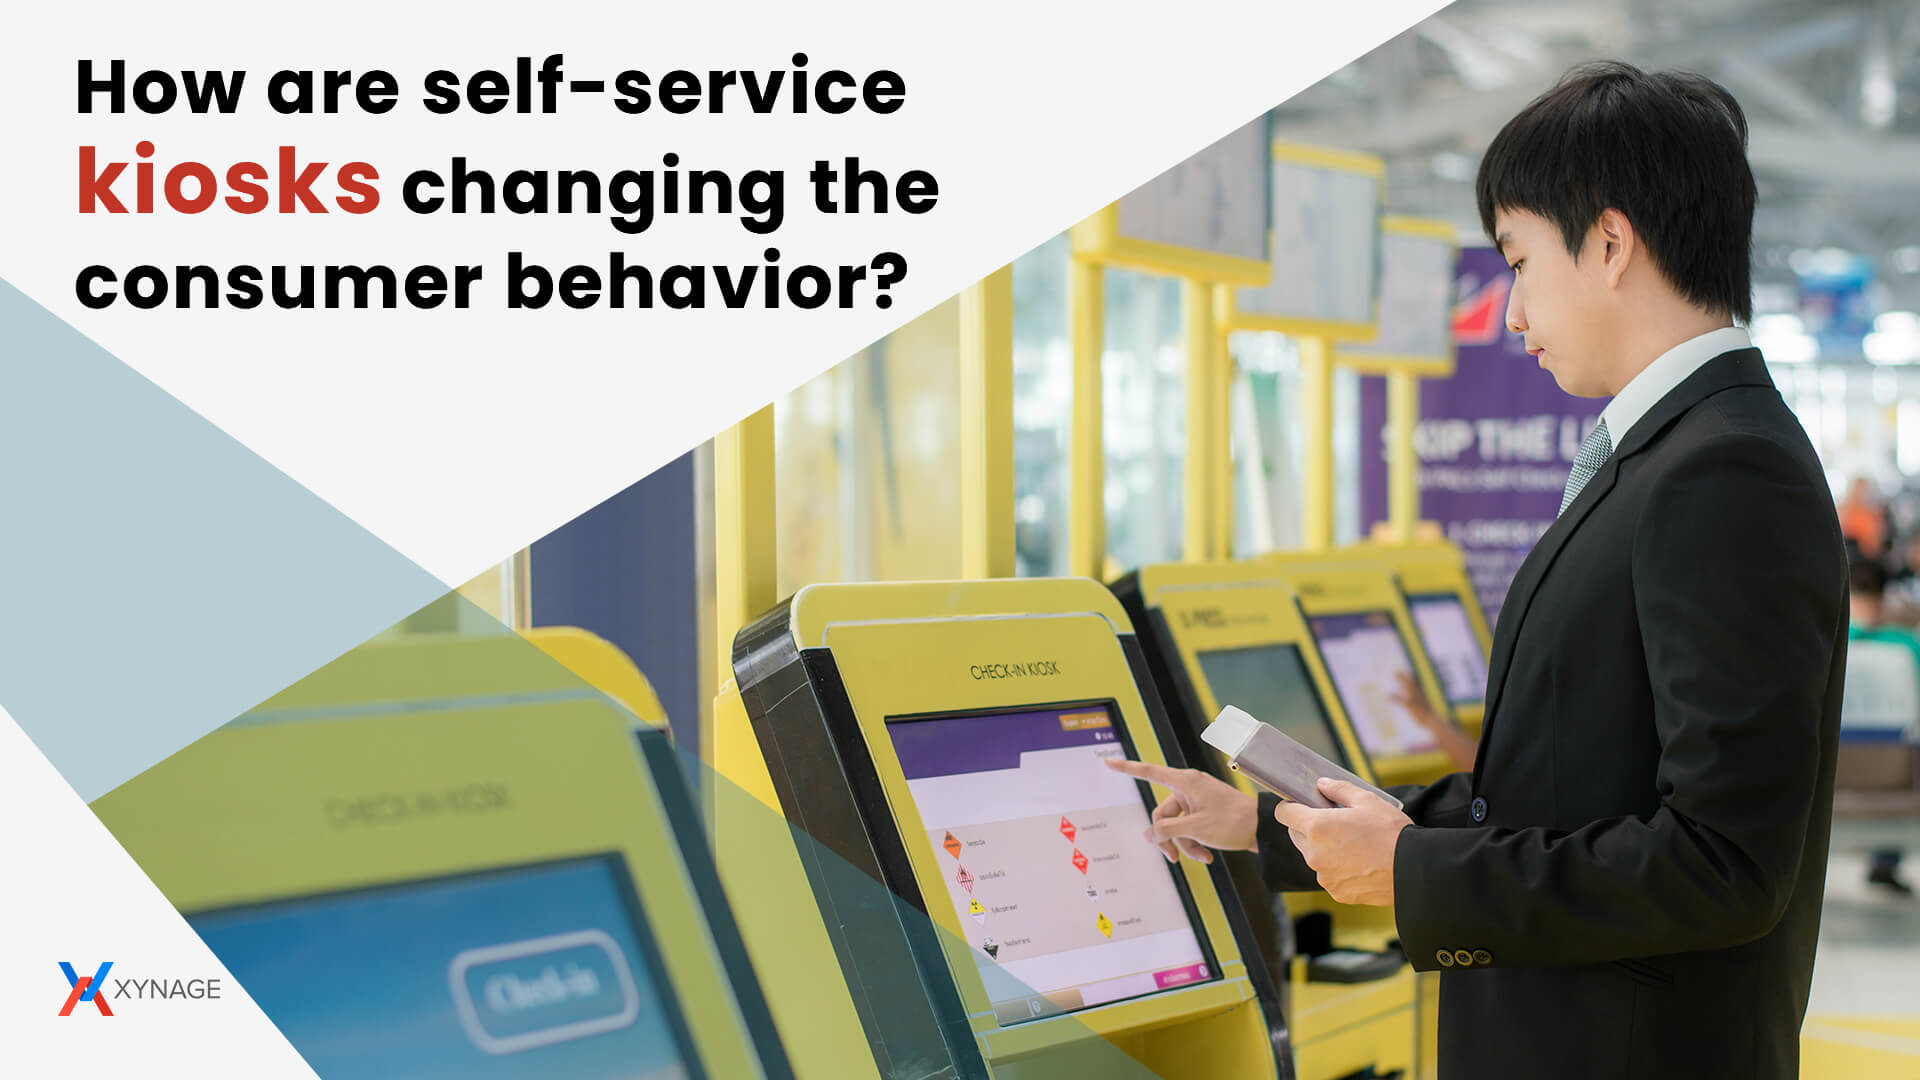 How are self-service kiosks changing consumer behavior?